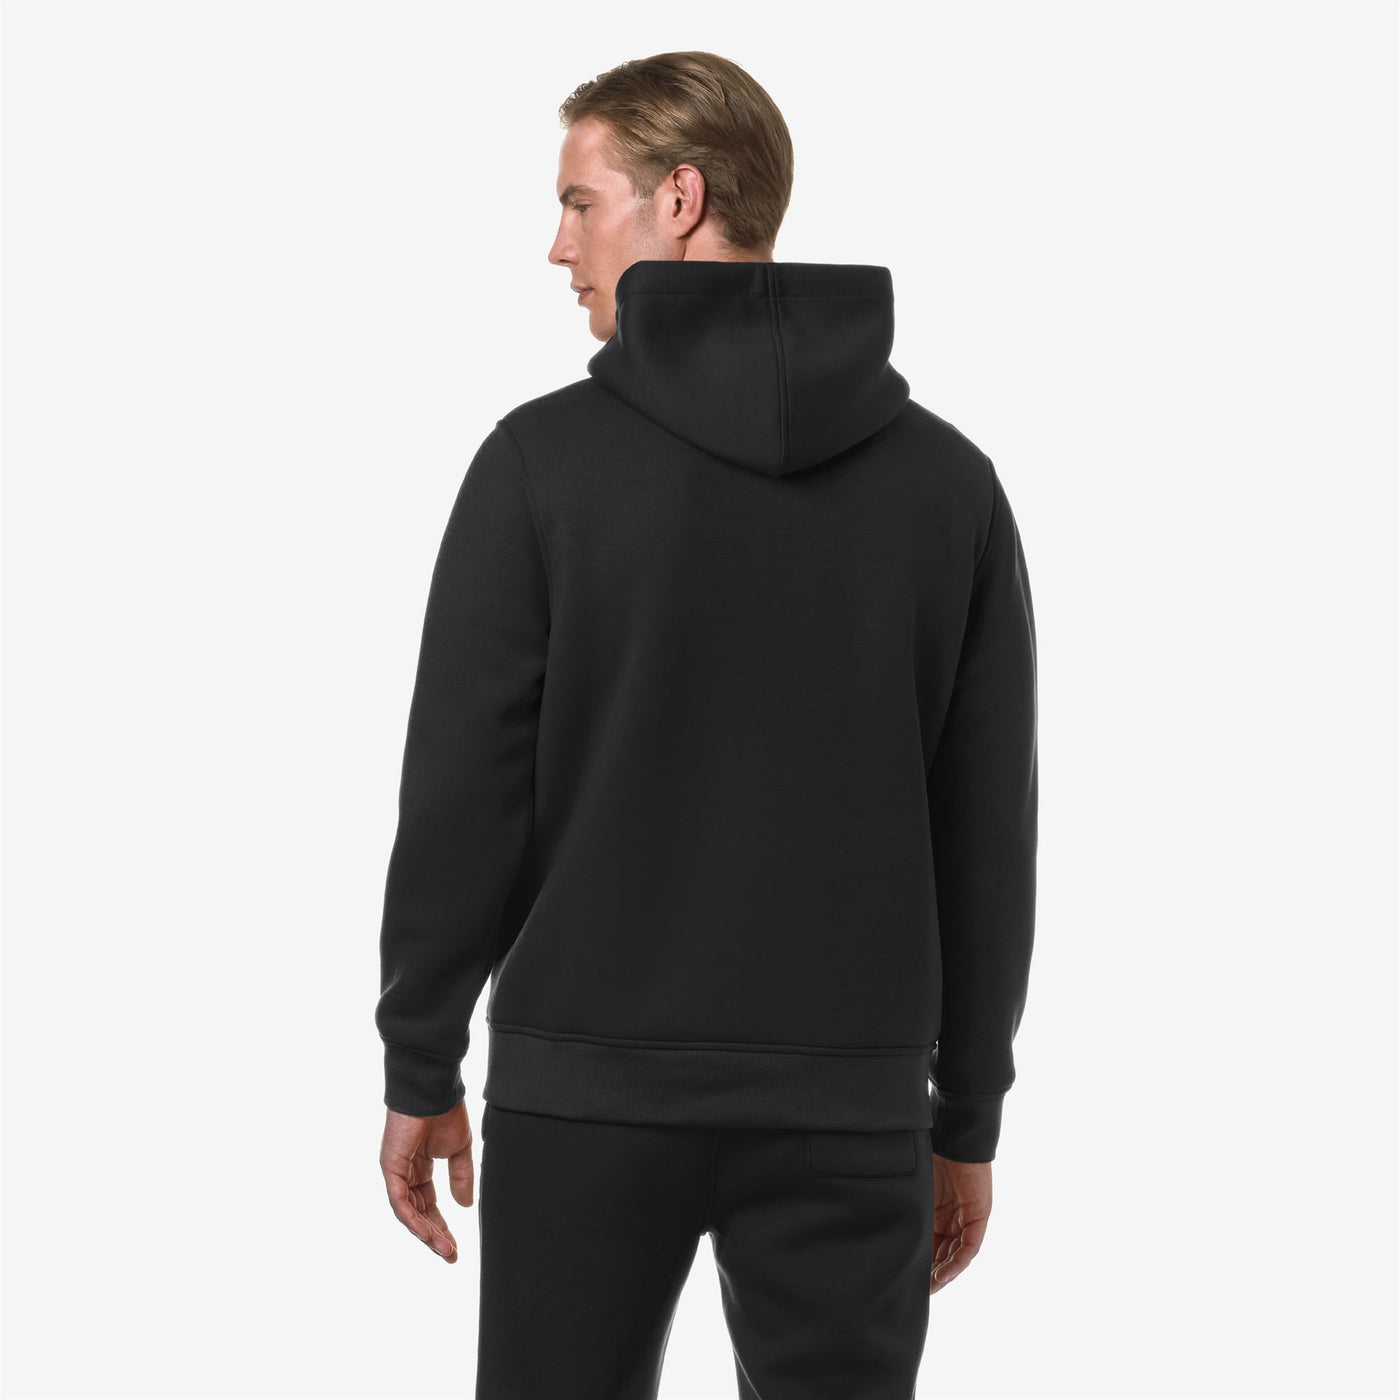 Fleece Man BERNIE SPACER Pull  Over BLACK PURE Dressed Front Double		